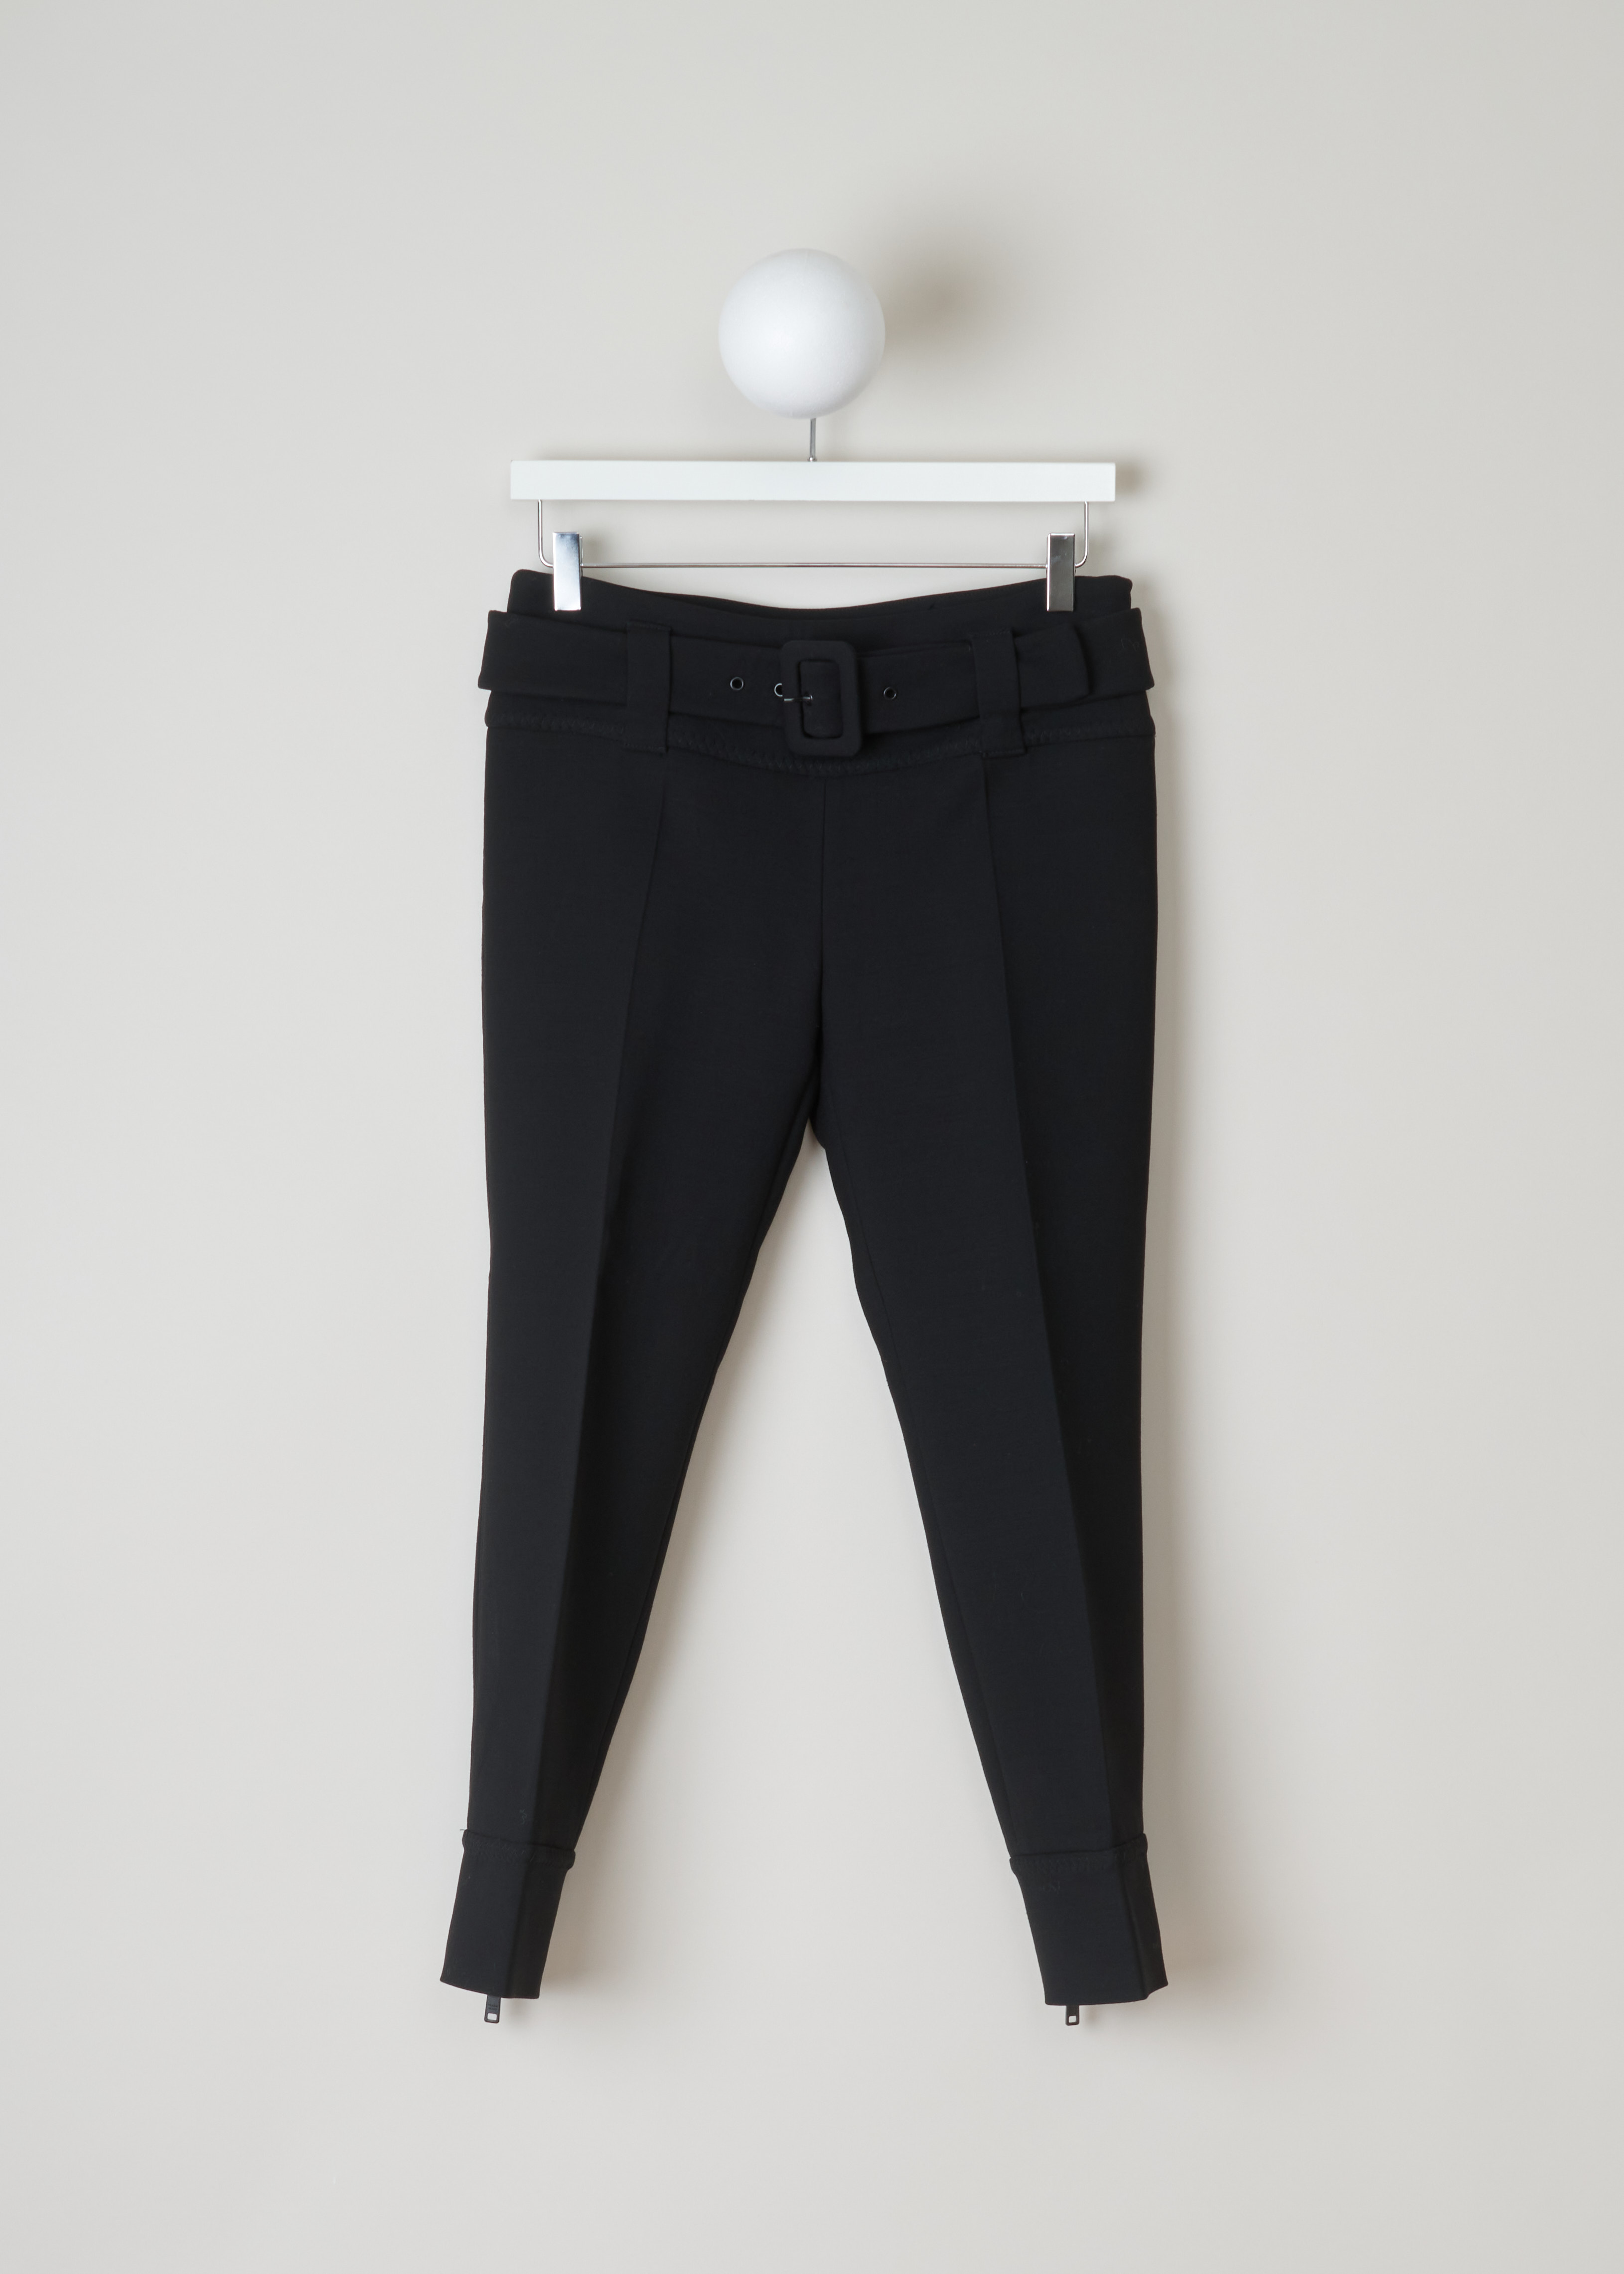 Prada Black belted trousers Natte_Double_Im_P271BH_F0002_Nero front. Fitted black trousers with a wide waistband with belt loops and a detachable belt in the same fabric, an invisible zipper fastening on the side, centre creases and cuffed hems.